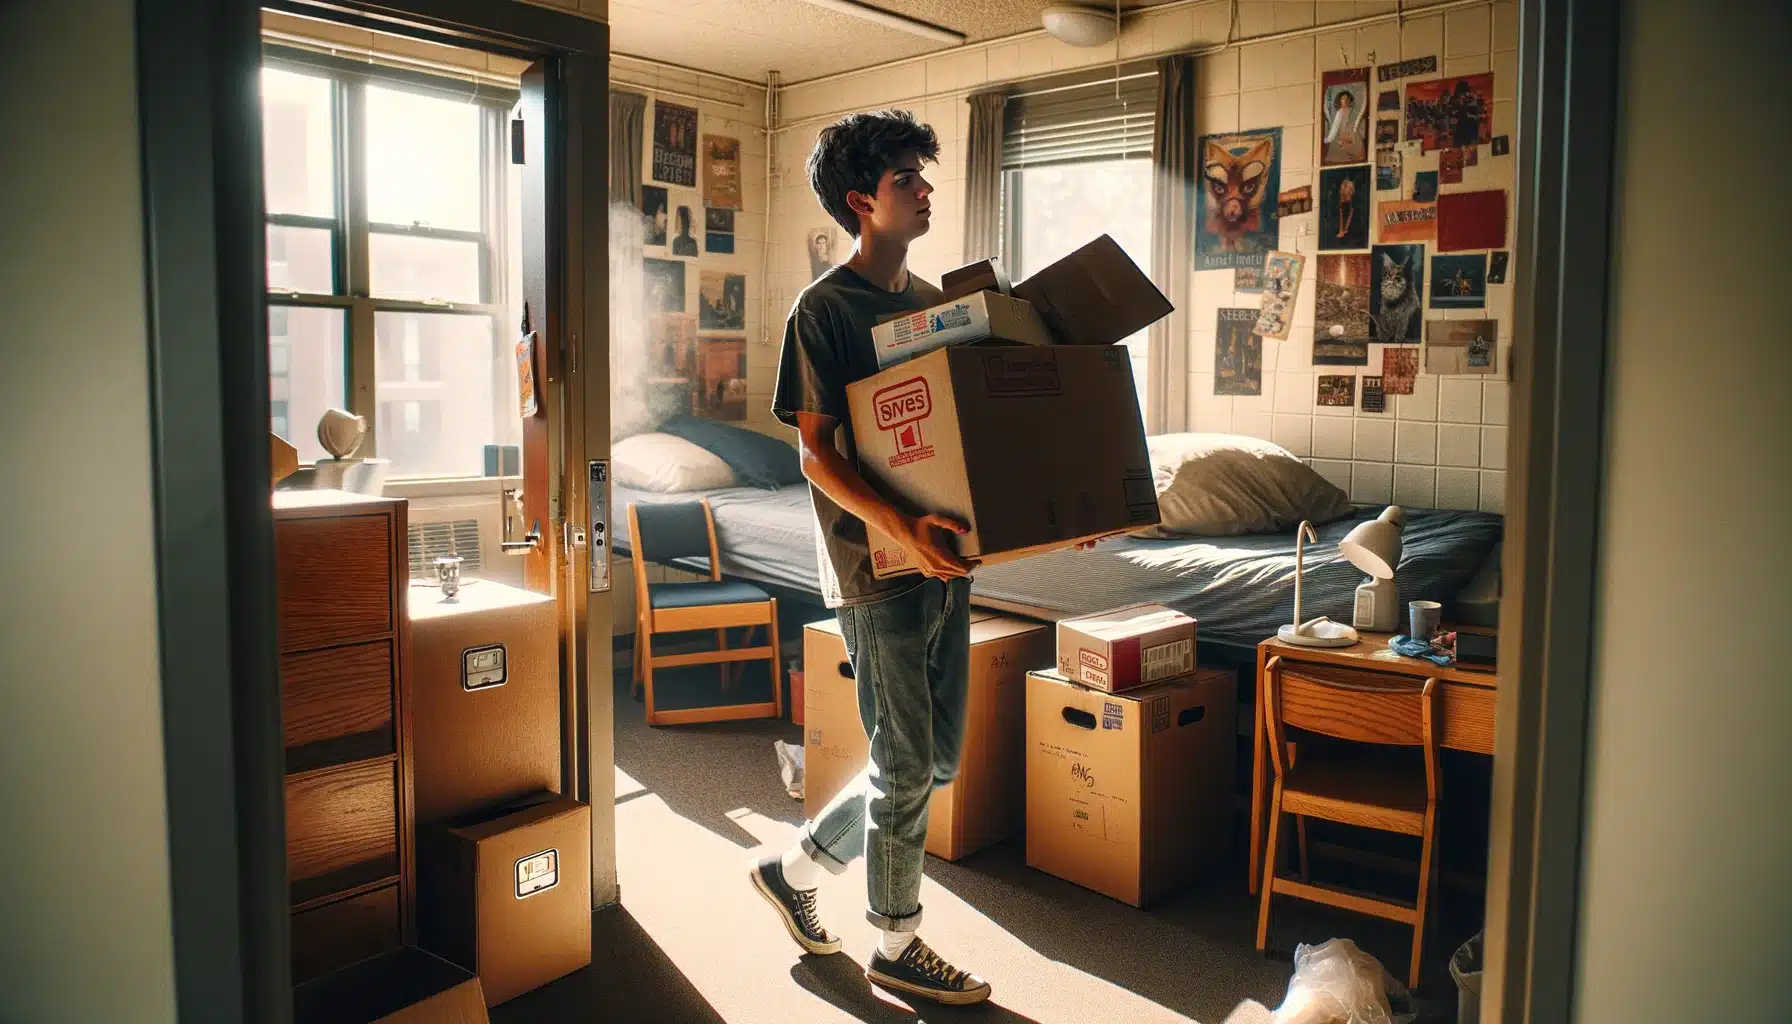 Image of a college student moving out carrying storage boxes.